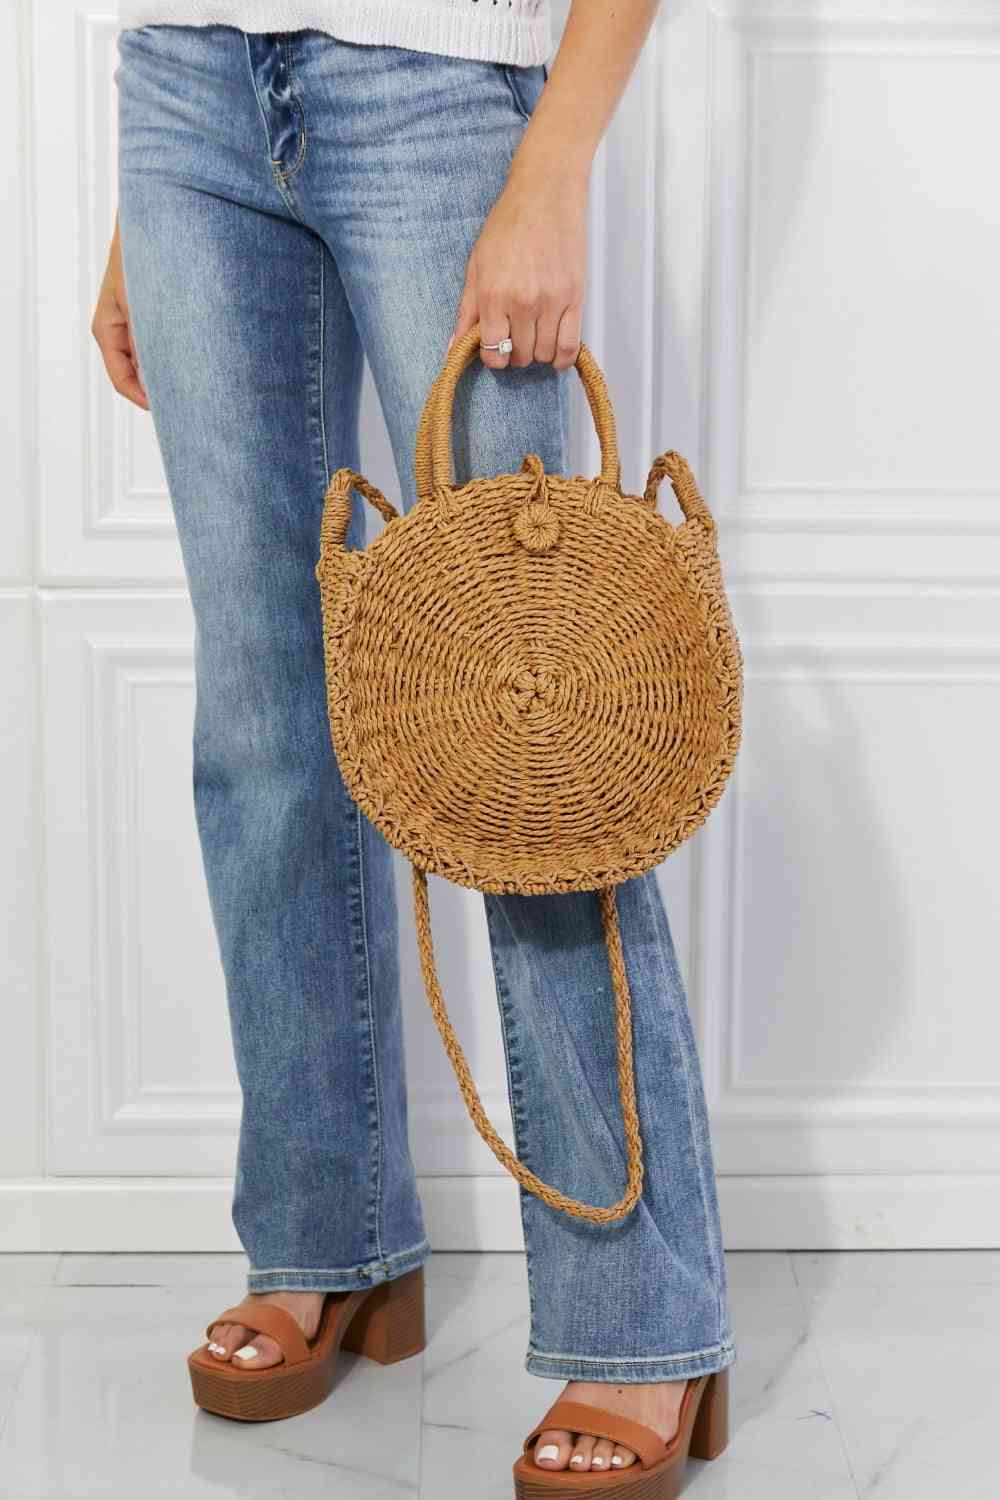 Justin Taylor Feeling Cute Rounded Rattan Handbag in Camel Camel One Size